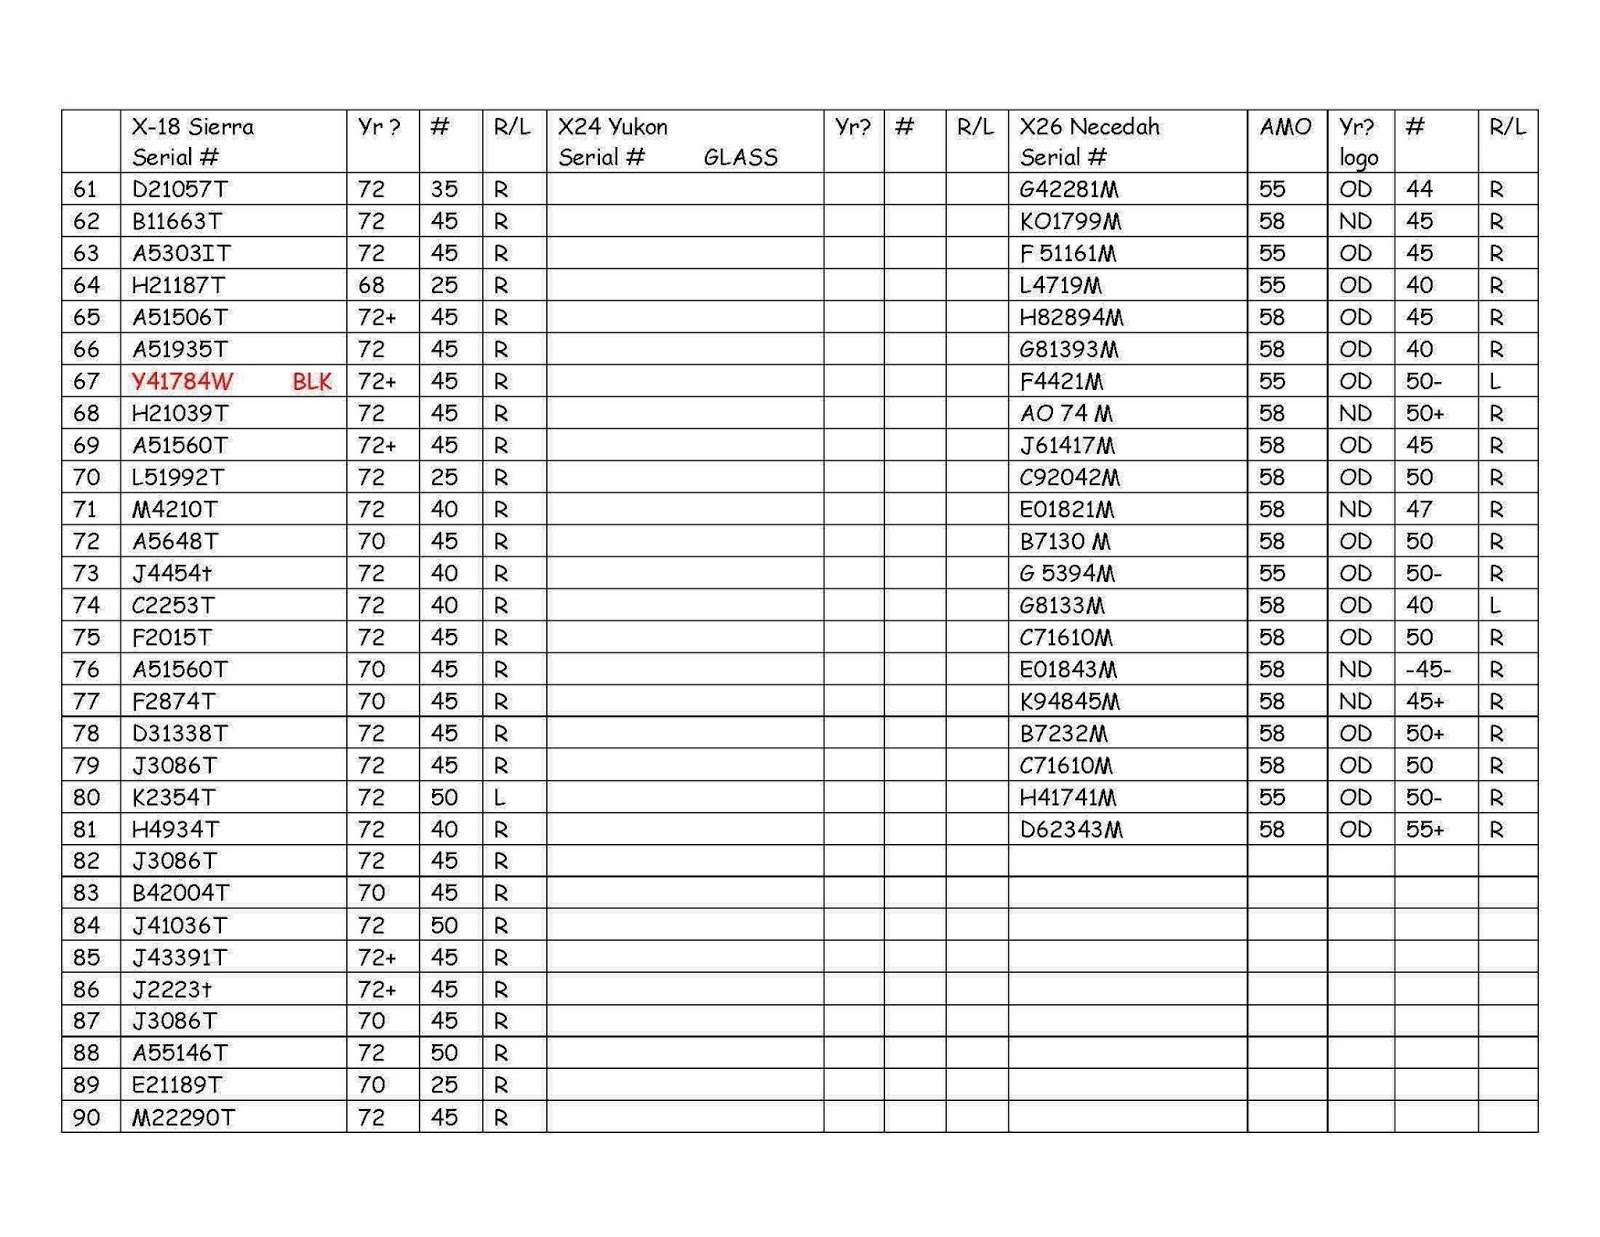 Hoyt bow serial number lookup list